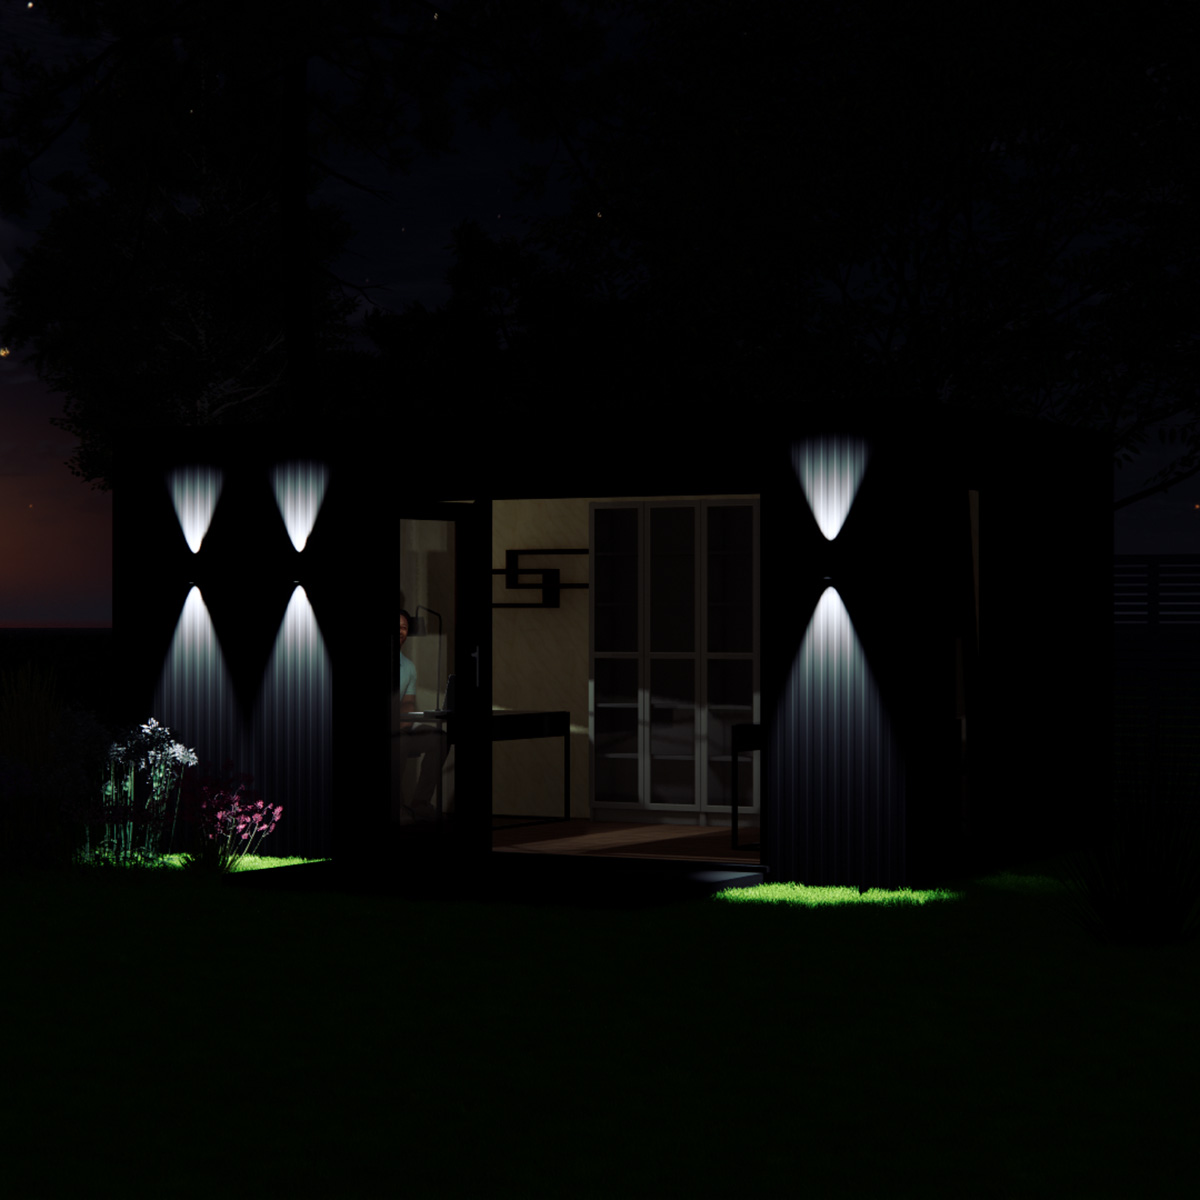 Night time visualisation of 3.0 by 5.0 garden room